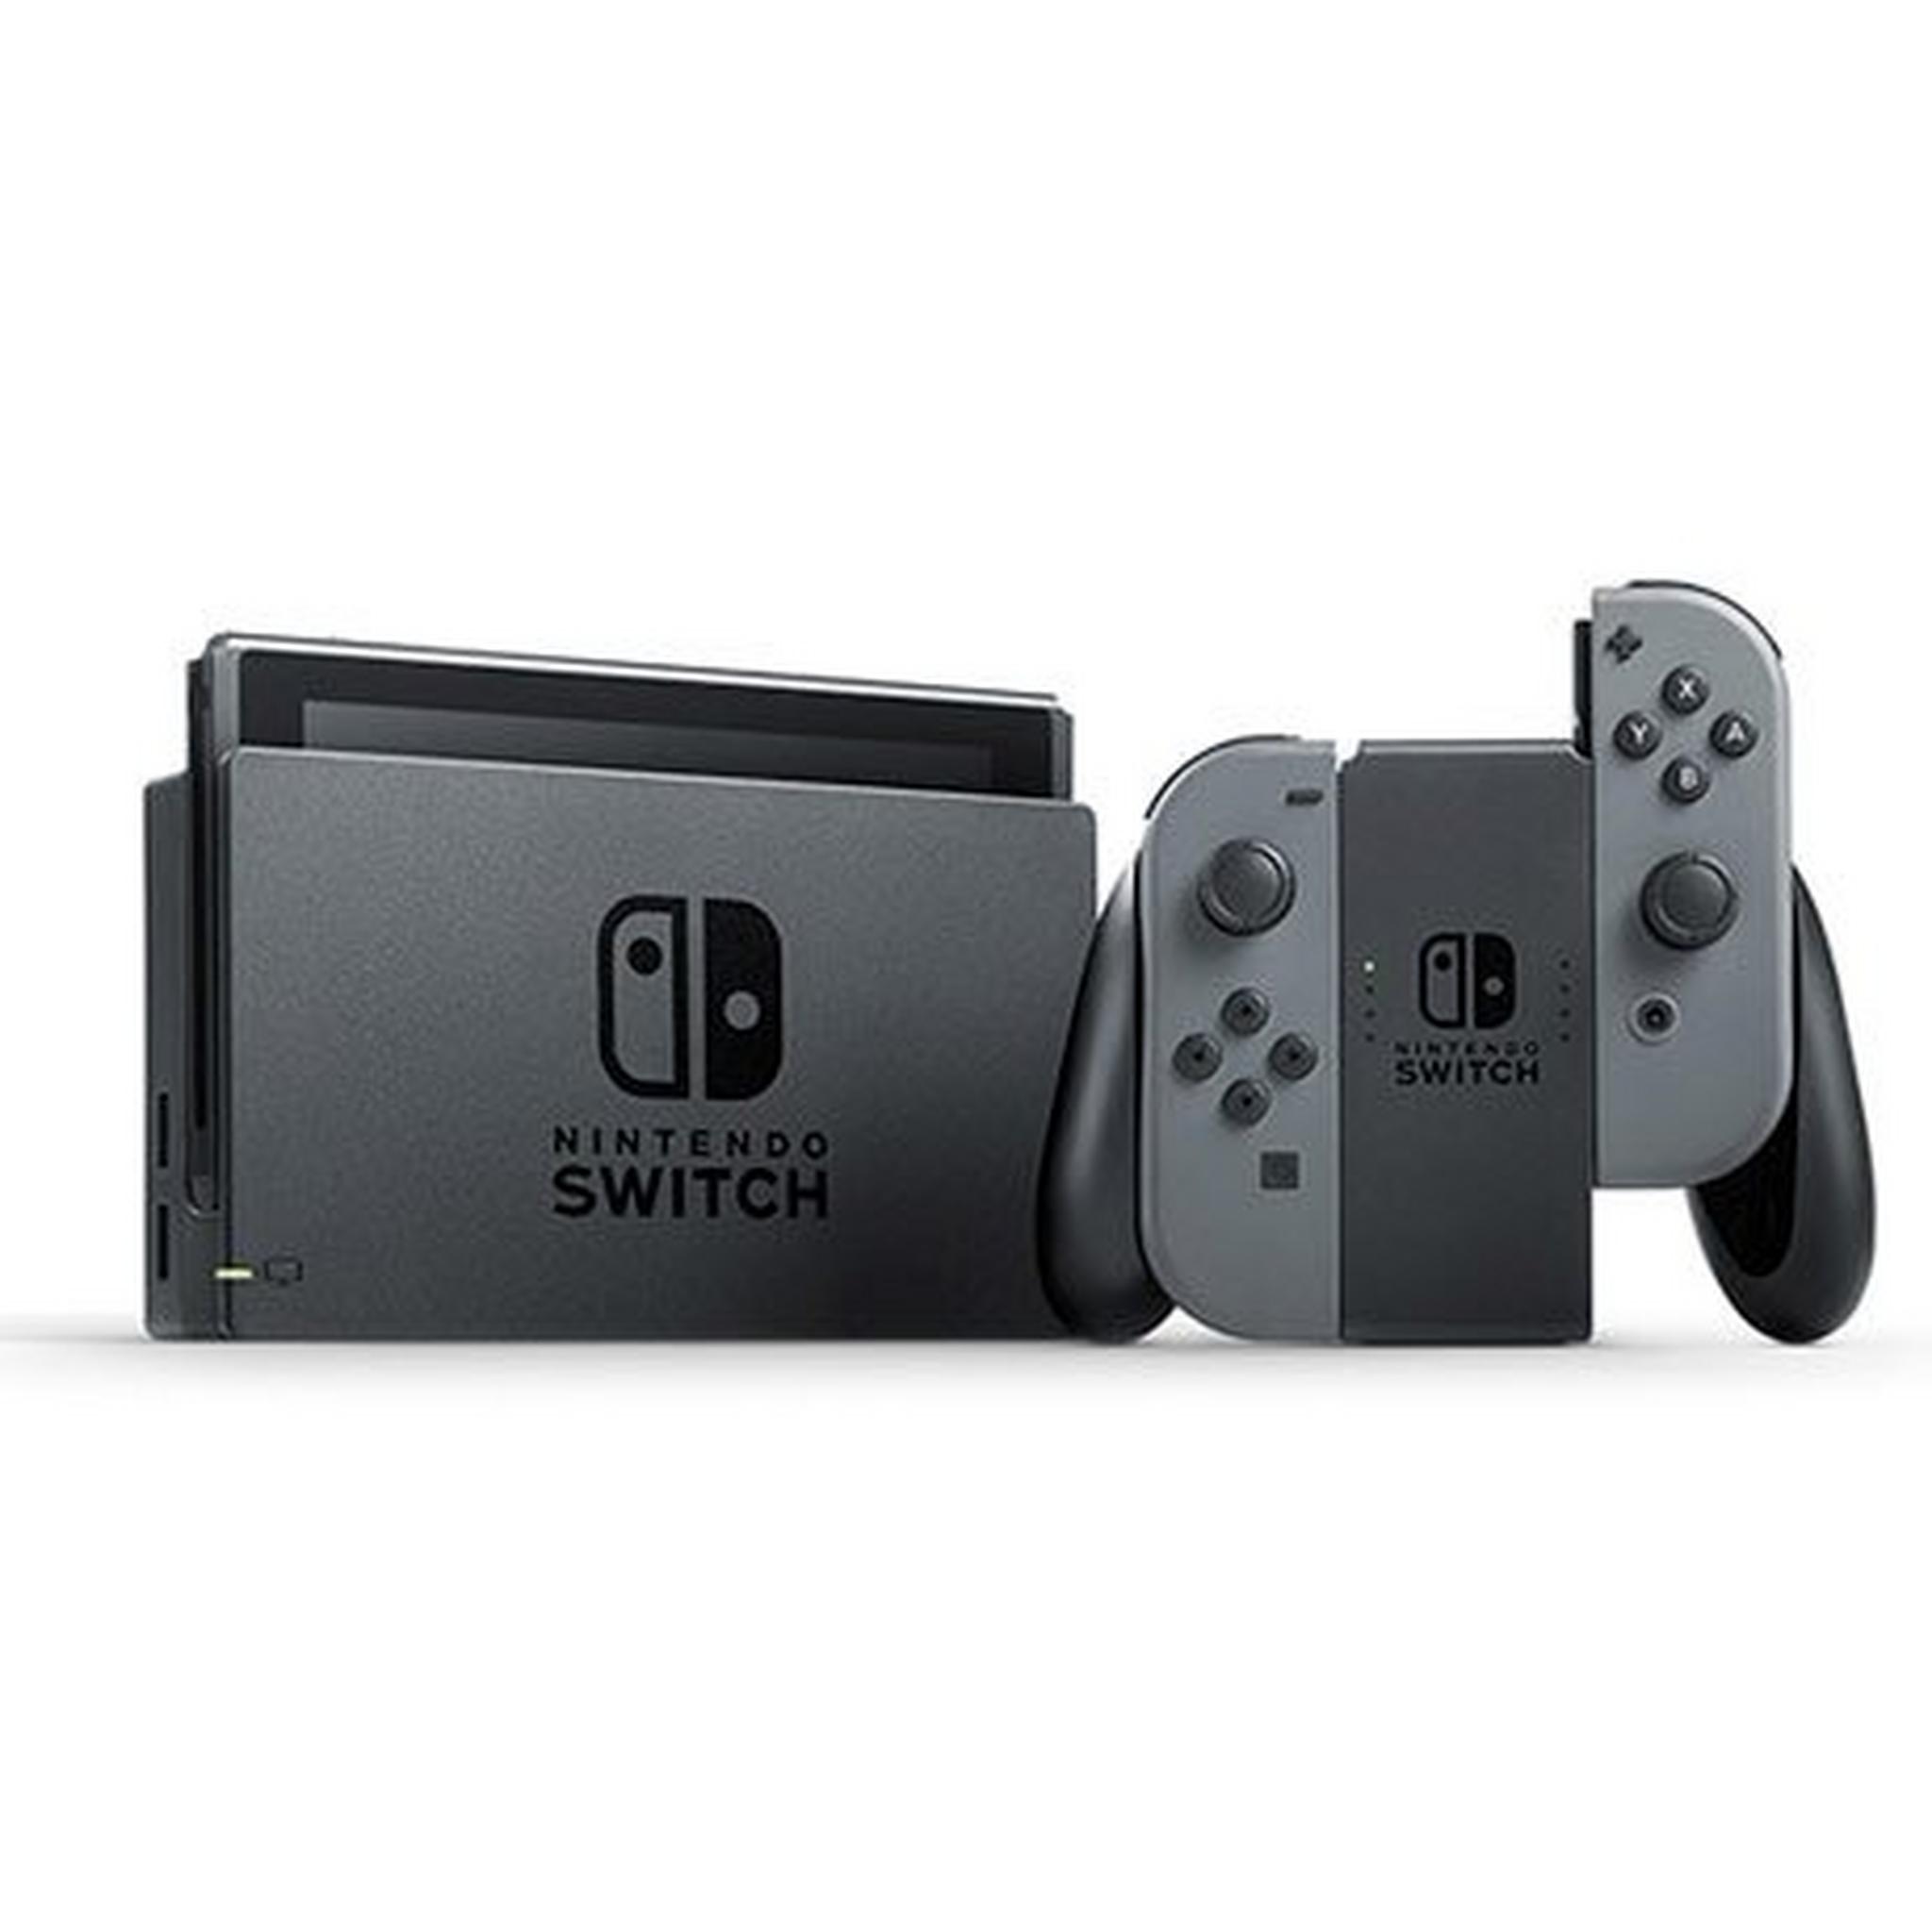 Nintendo Switch Portable Gaming System Grey + Traveler Protection Pack + Stand